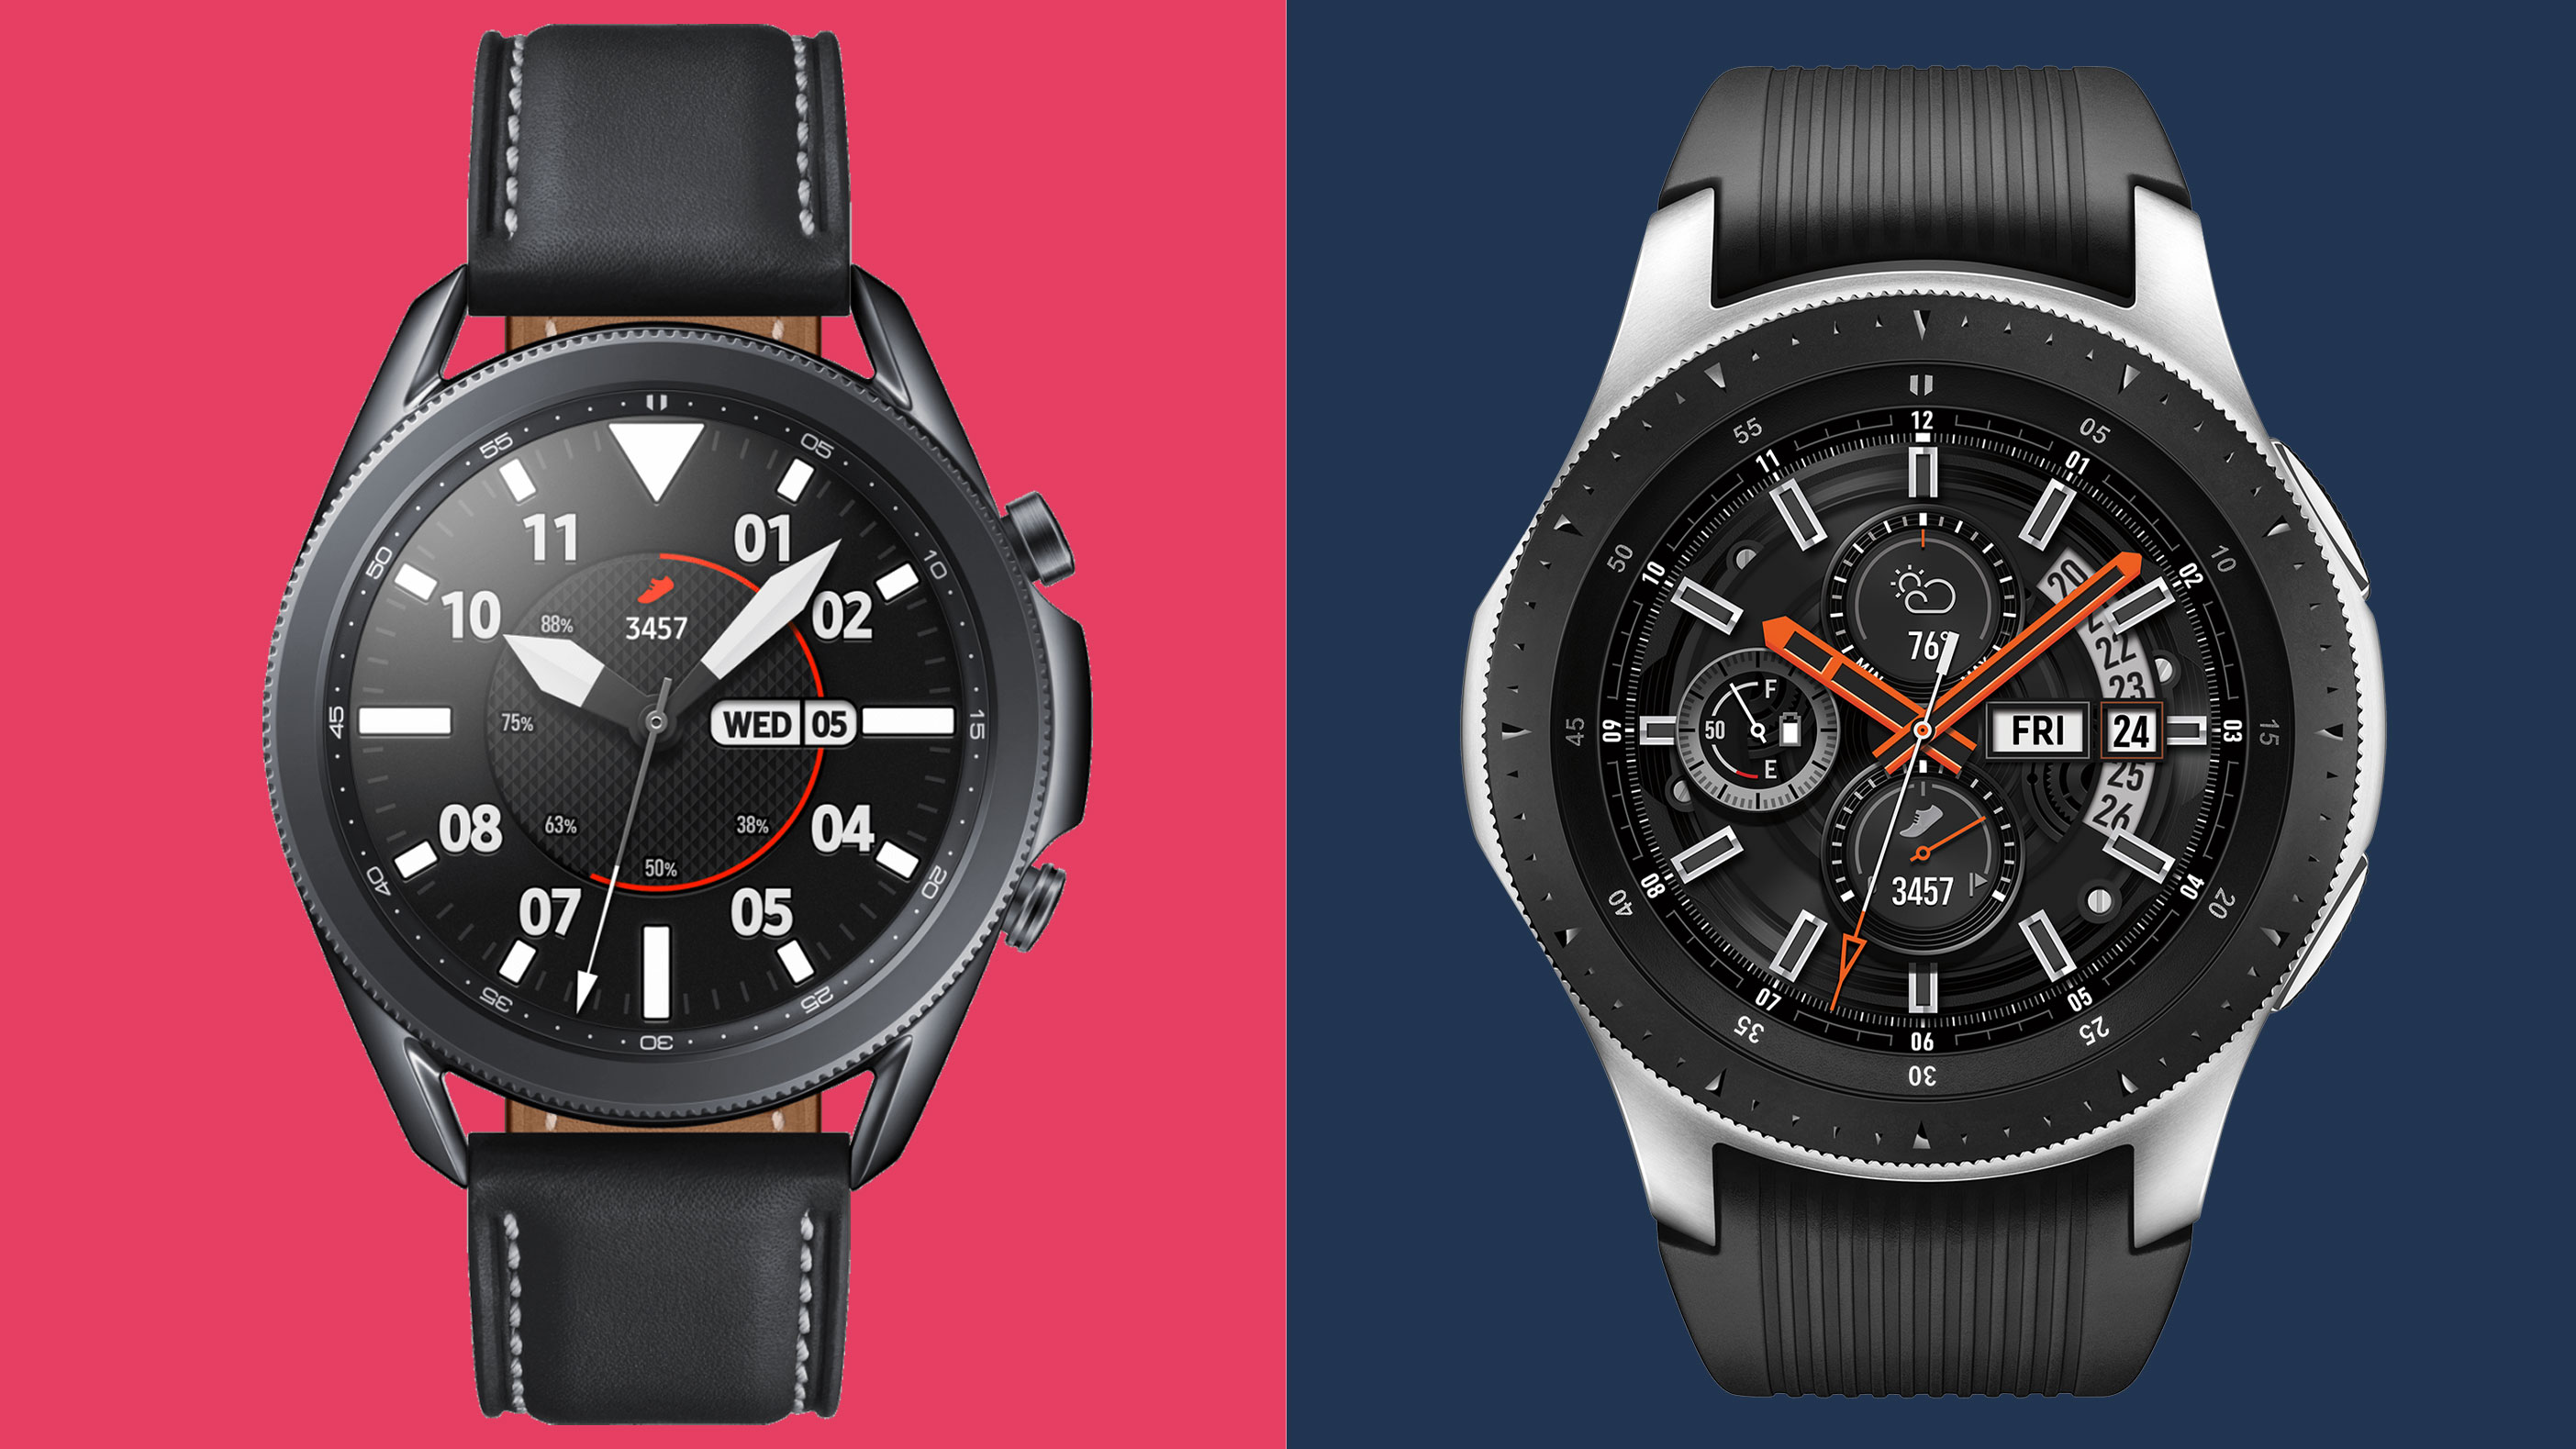 Samsung Galaxy Watch 3 vs Samsung Galaxy Watch which smartwatch is for